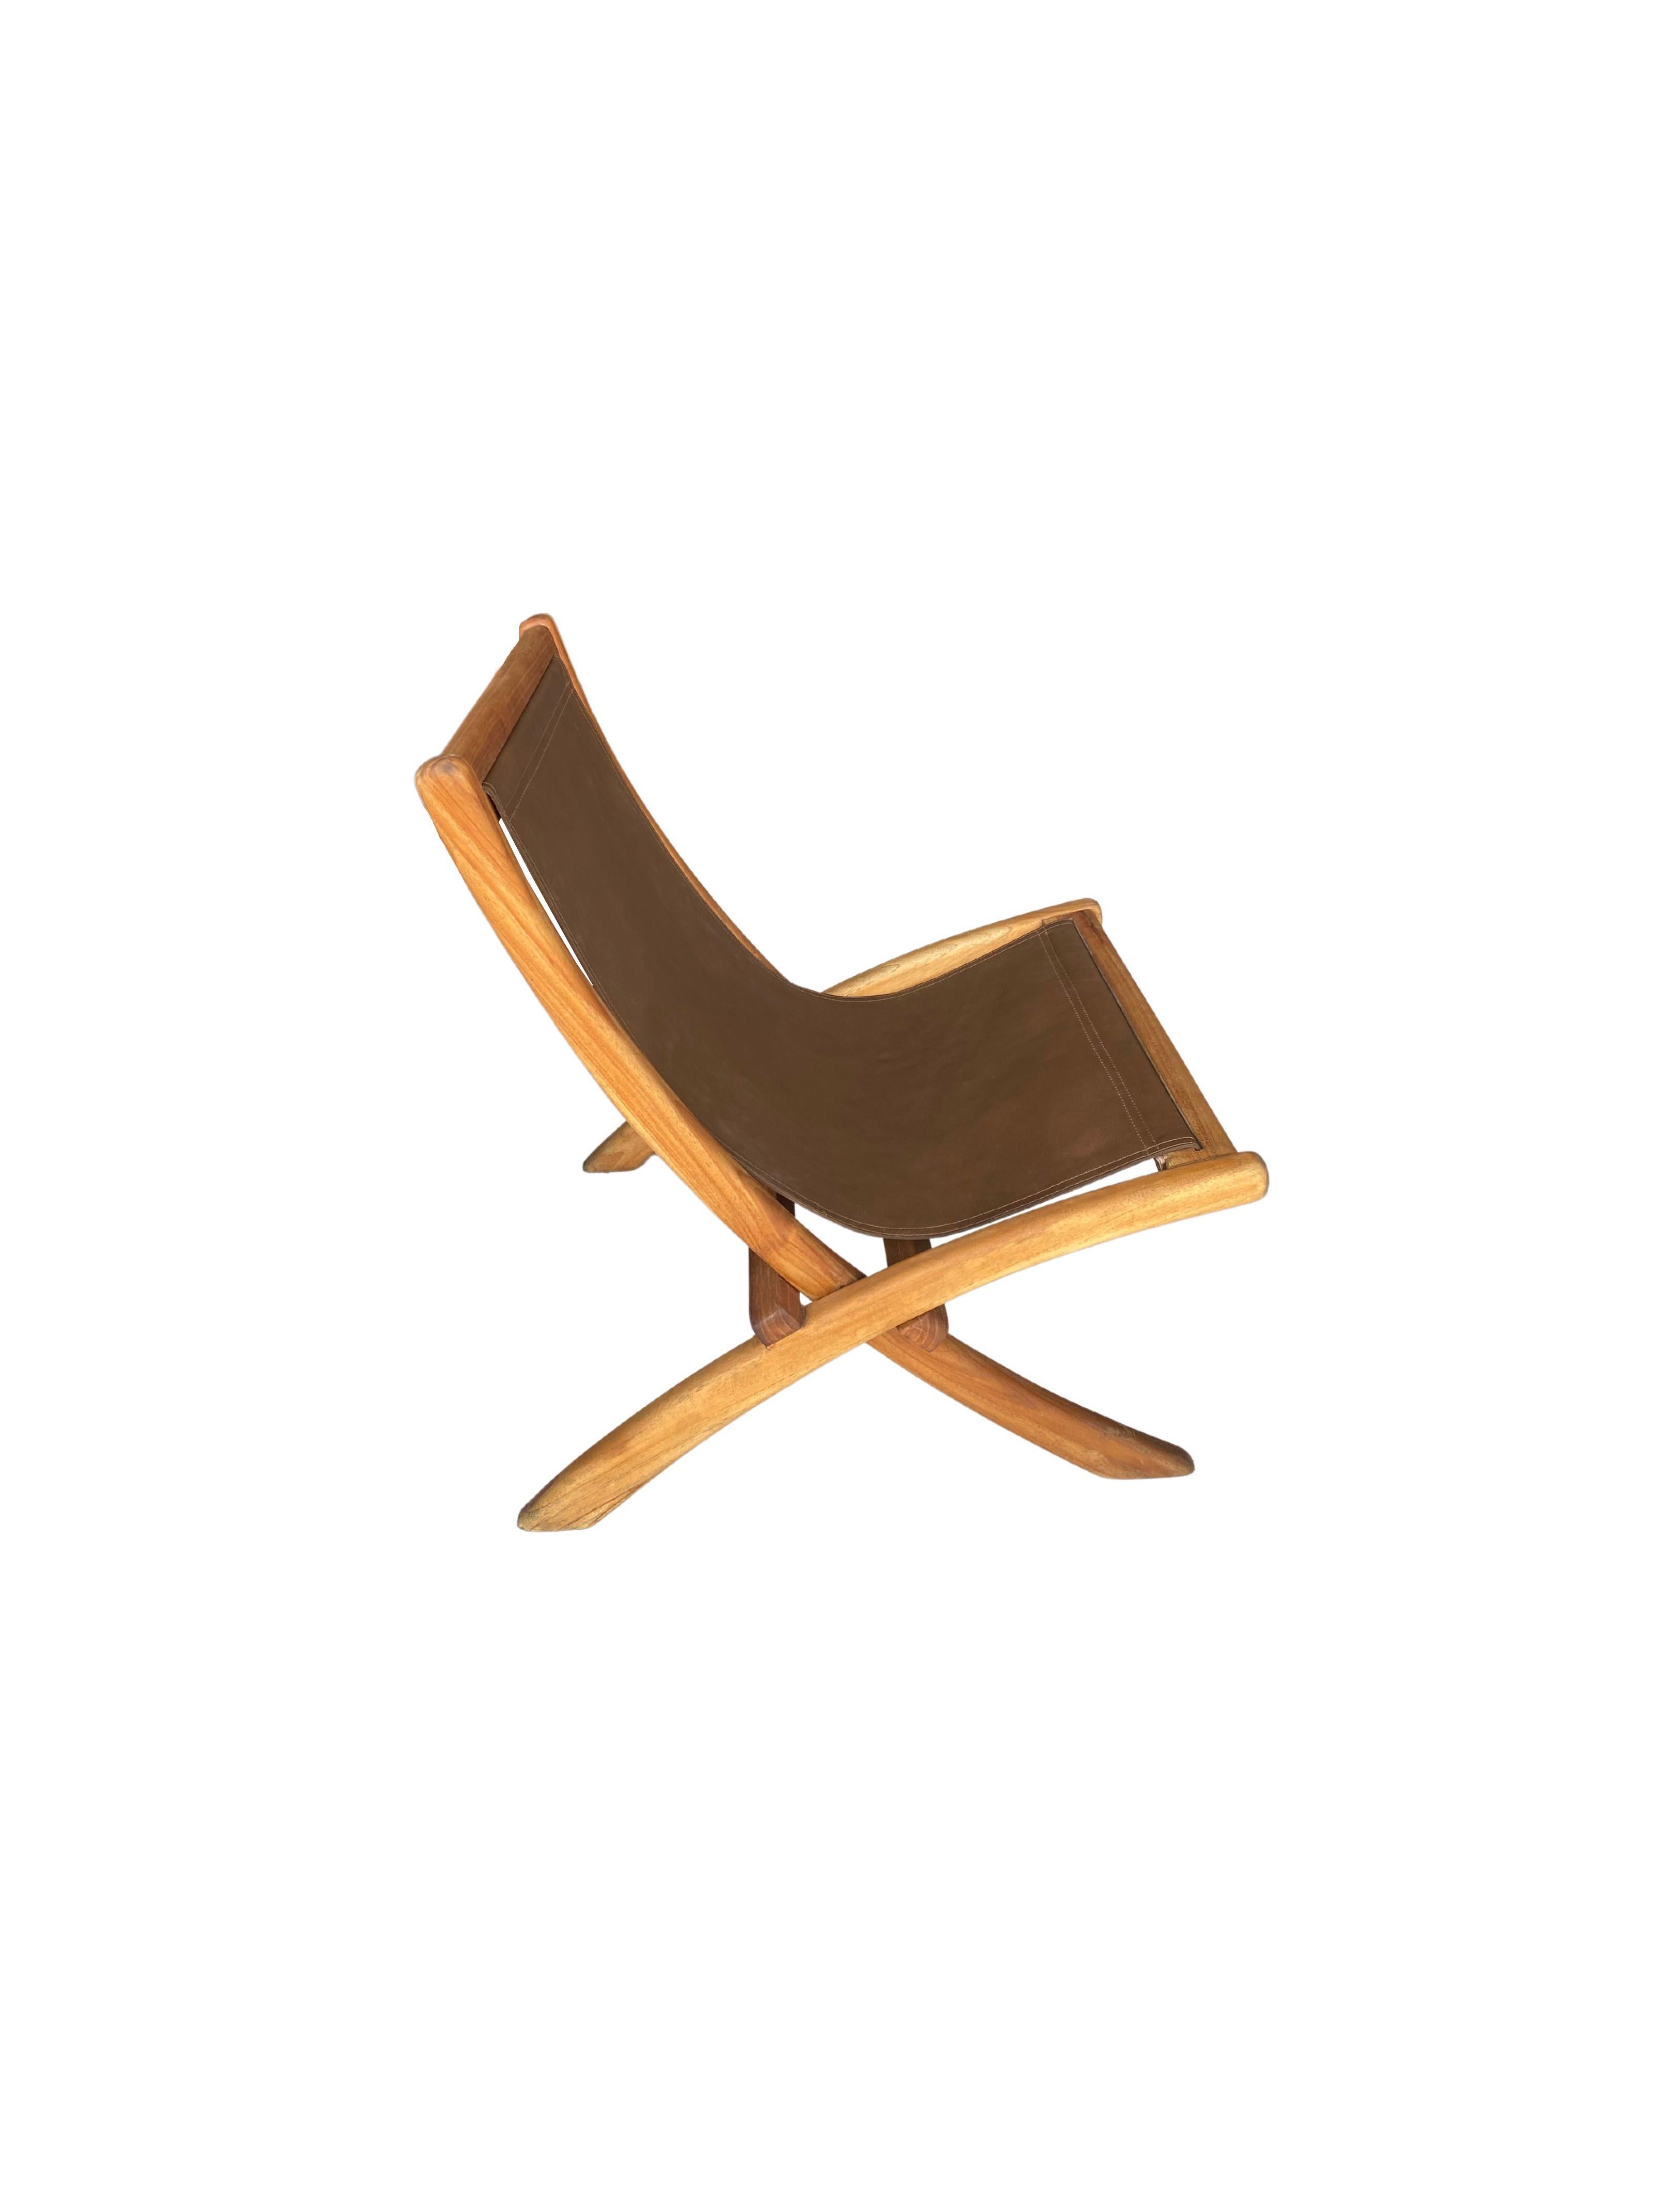 Indonesian Foldable Teak Wood Framed Lounge Chair, with Hanging Leather Seat